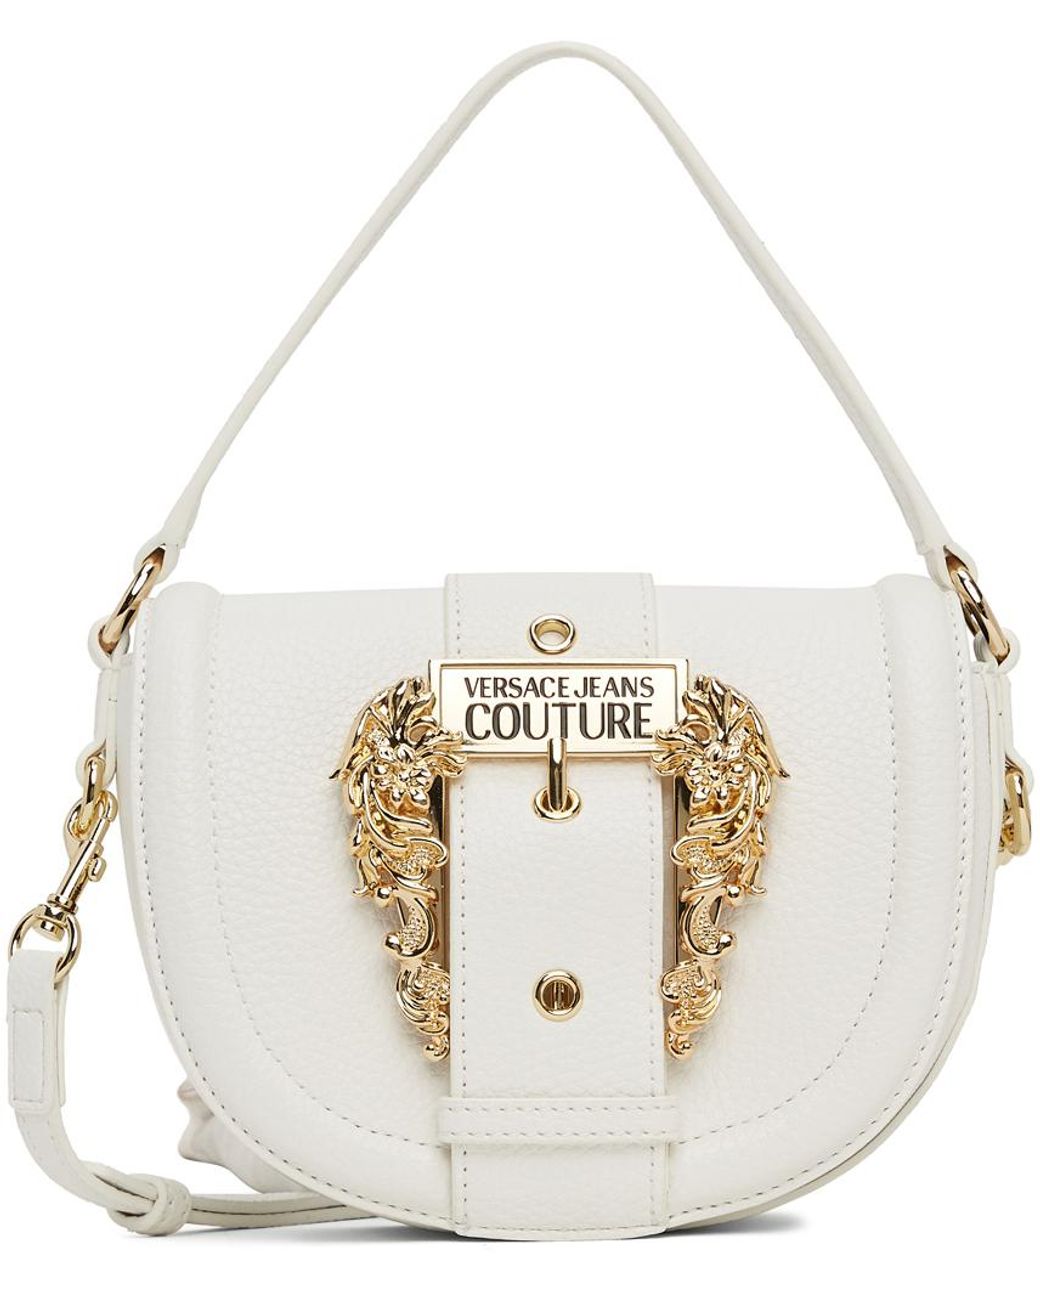 Versace Jeans Couture Bags In White